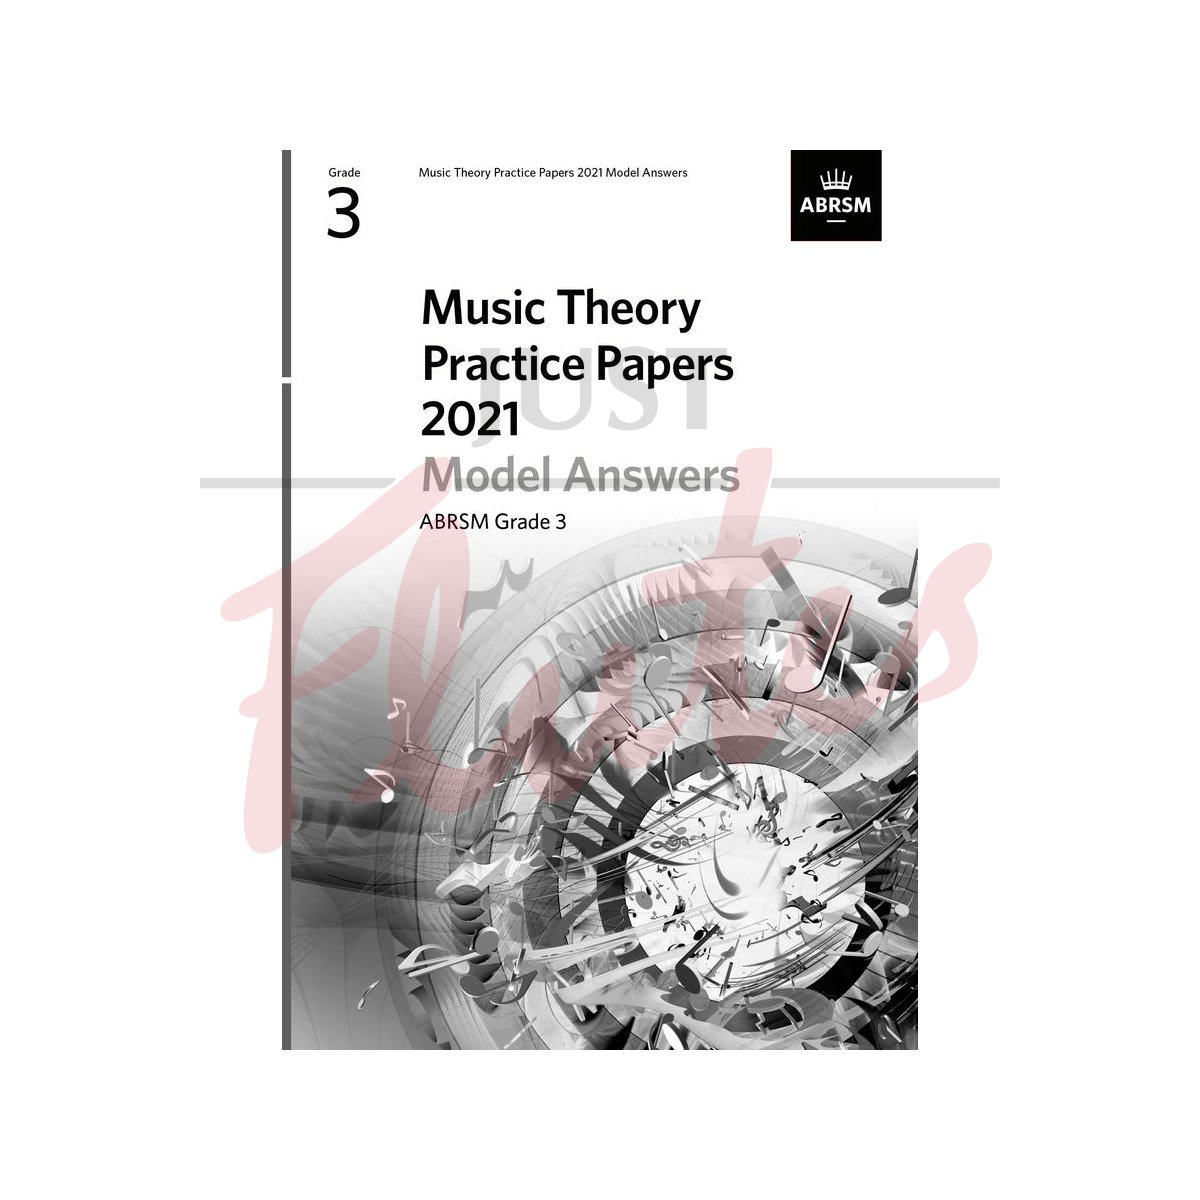 Music Theory Practice Papers 2021 Grade 3 - Model Answers